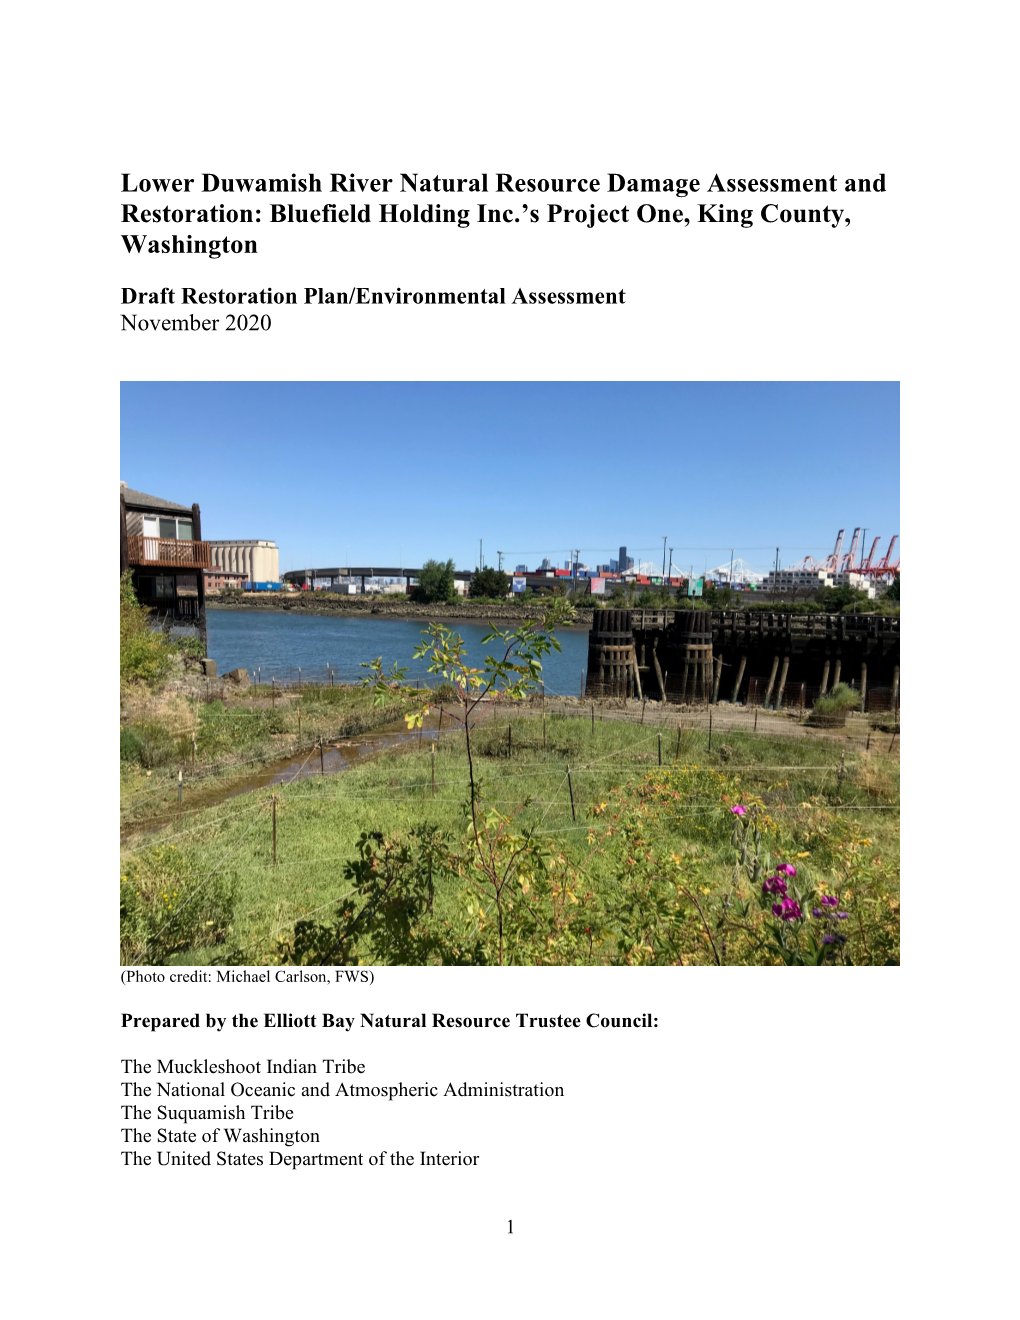 Lower Duwamish River Natural Resource Damage Assessment and Restoration: Bluefield Holding Inc.’S Project One, King County, Washington